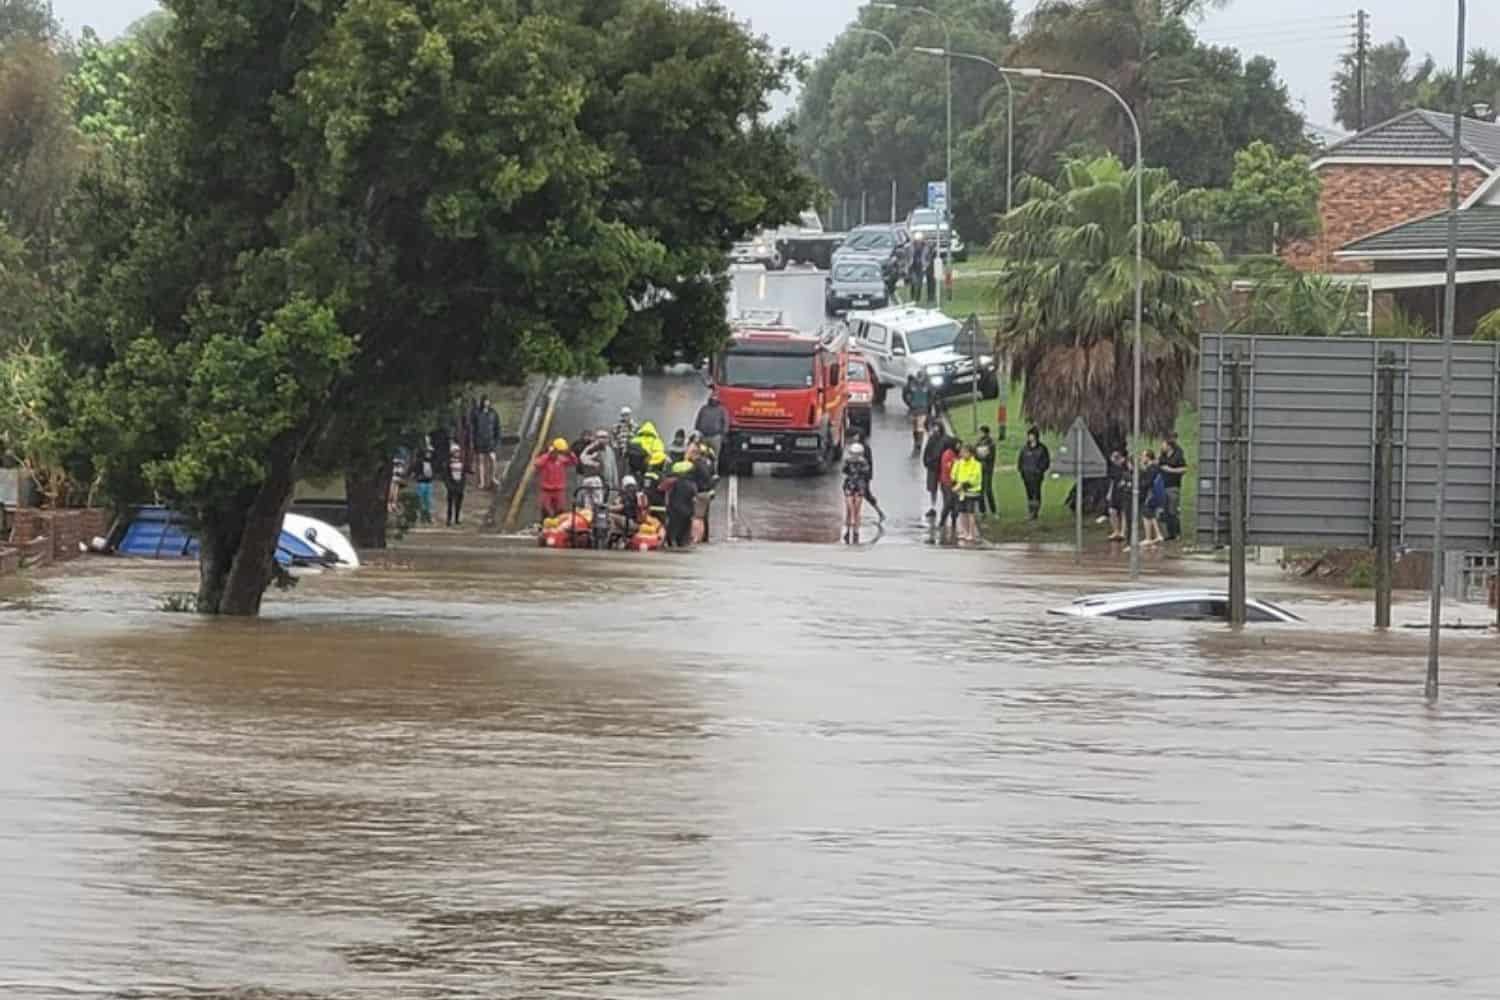 Eastern Cape flood leaves 6 dead including a police diver